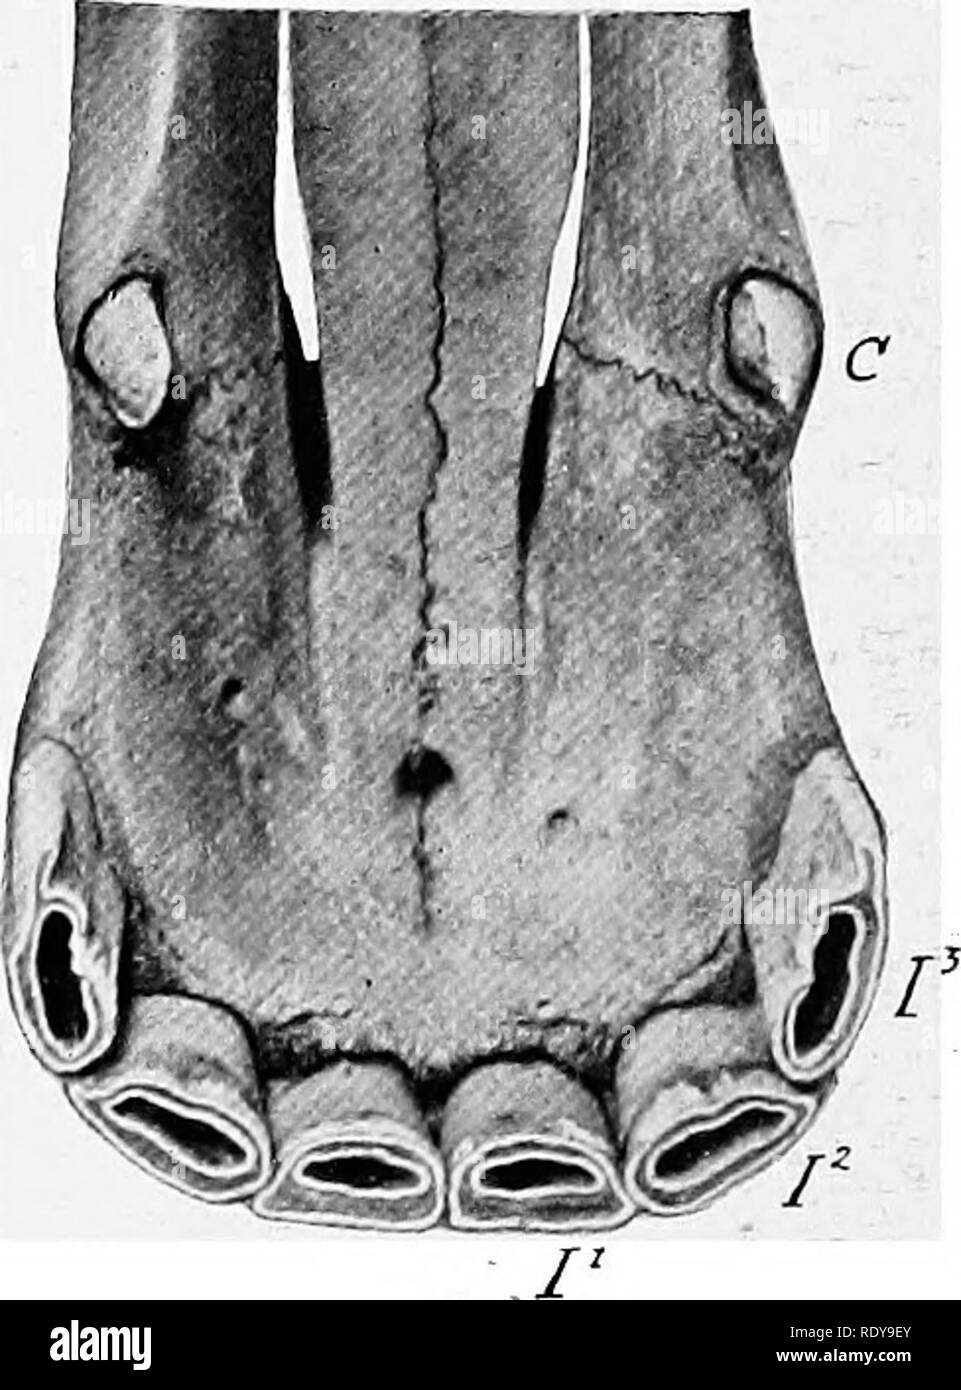 . The anatomy of the domestic animals . Veterinary anatomy. Fig. 340.—Loweh Incisoe aot) Canine Teeth oe Fig. 341.—Upper Incisor and Canine Teeth of Horse, Five Years Old. Horse, Five Years Old. The lingual border of the third upper incisor is unworn. /', I^, I', Incisor; C, canine. and are curved with the concavity directed backward. The exposed crown in the 1 It is interesting to notice that vestigial canines are not at all uncommon in mares, espe- cially in the lower jaw. They are very small, and do not usually erupt; their presence is indi- cated in the latter case by a prominence of the g Stock Photo